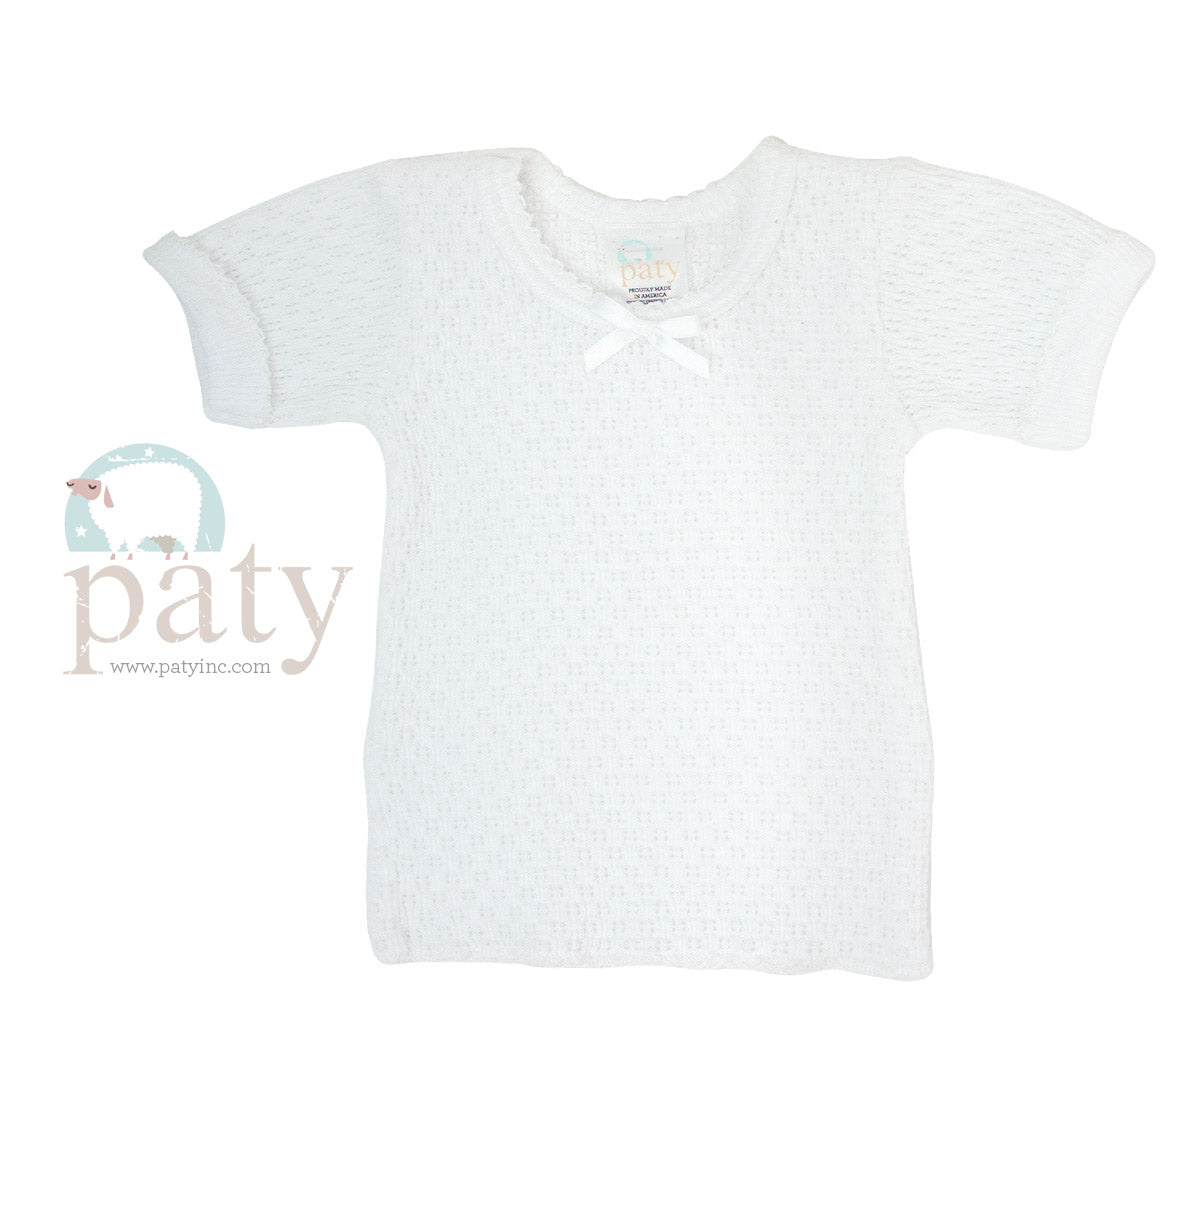 Signature Paty Top